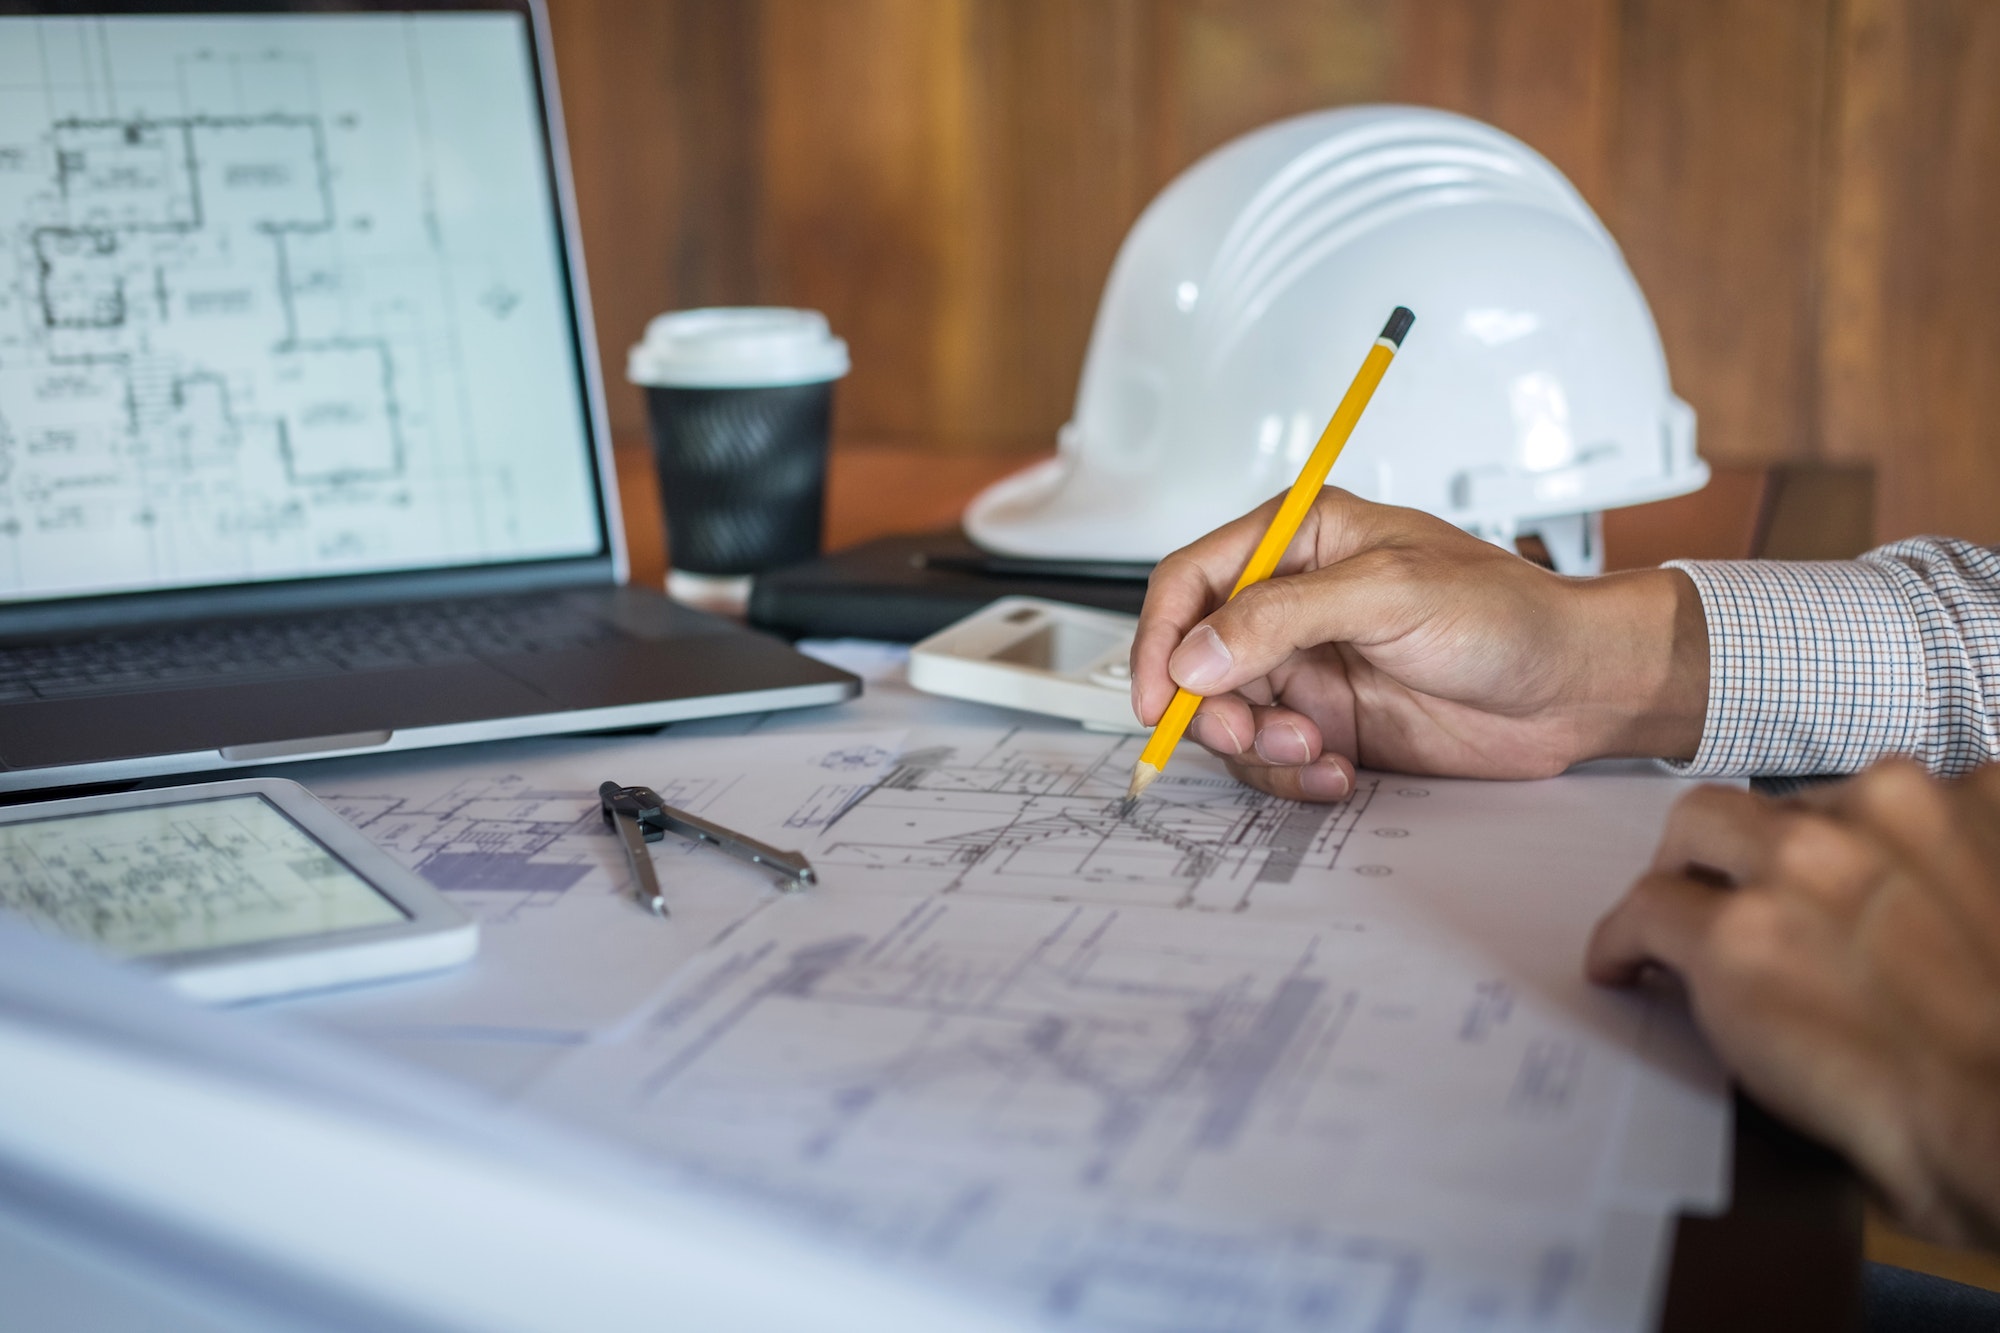 Construction engineering or architect hands working on blueprint inspection in workplace